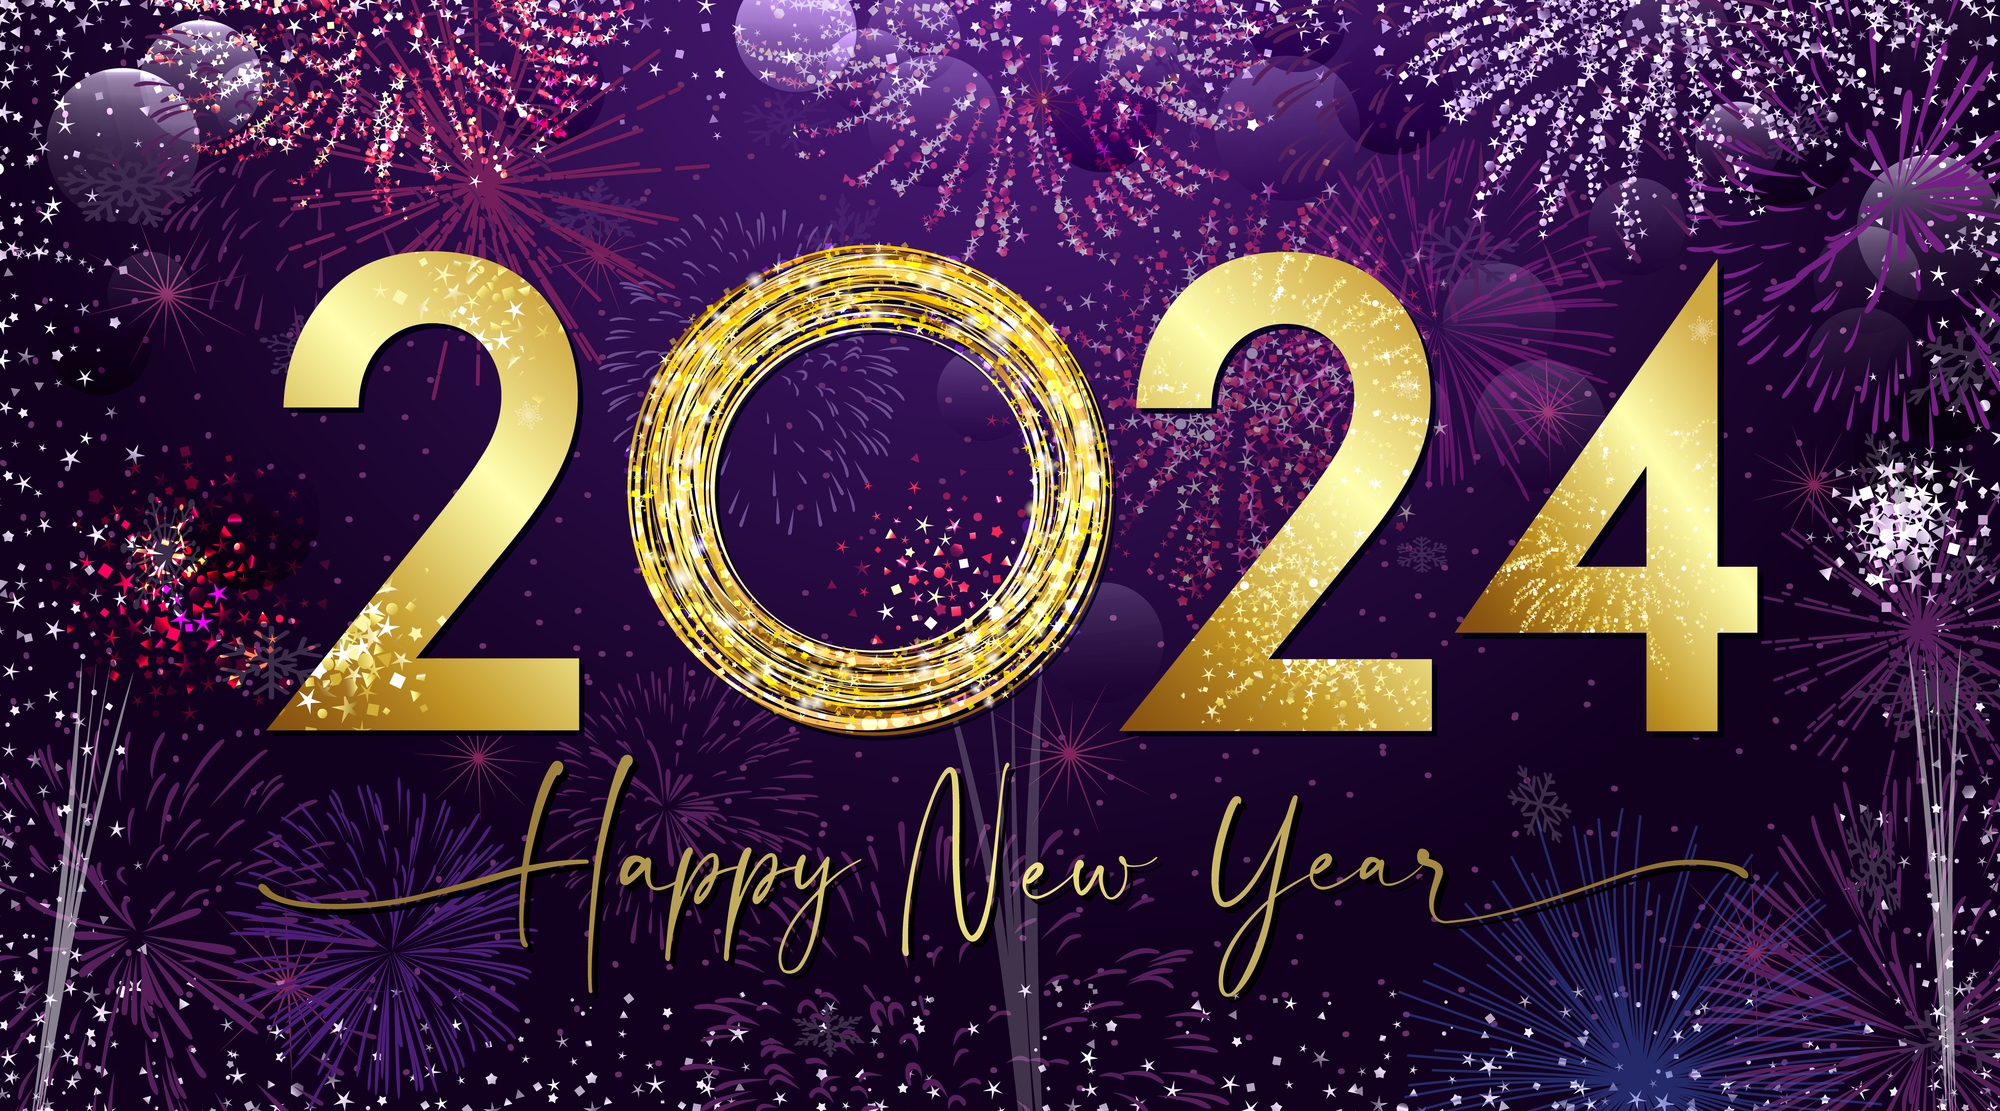 2024 happy new year celebration on purple background with fireworks at Power Plant Live.